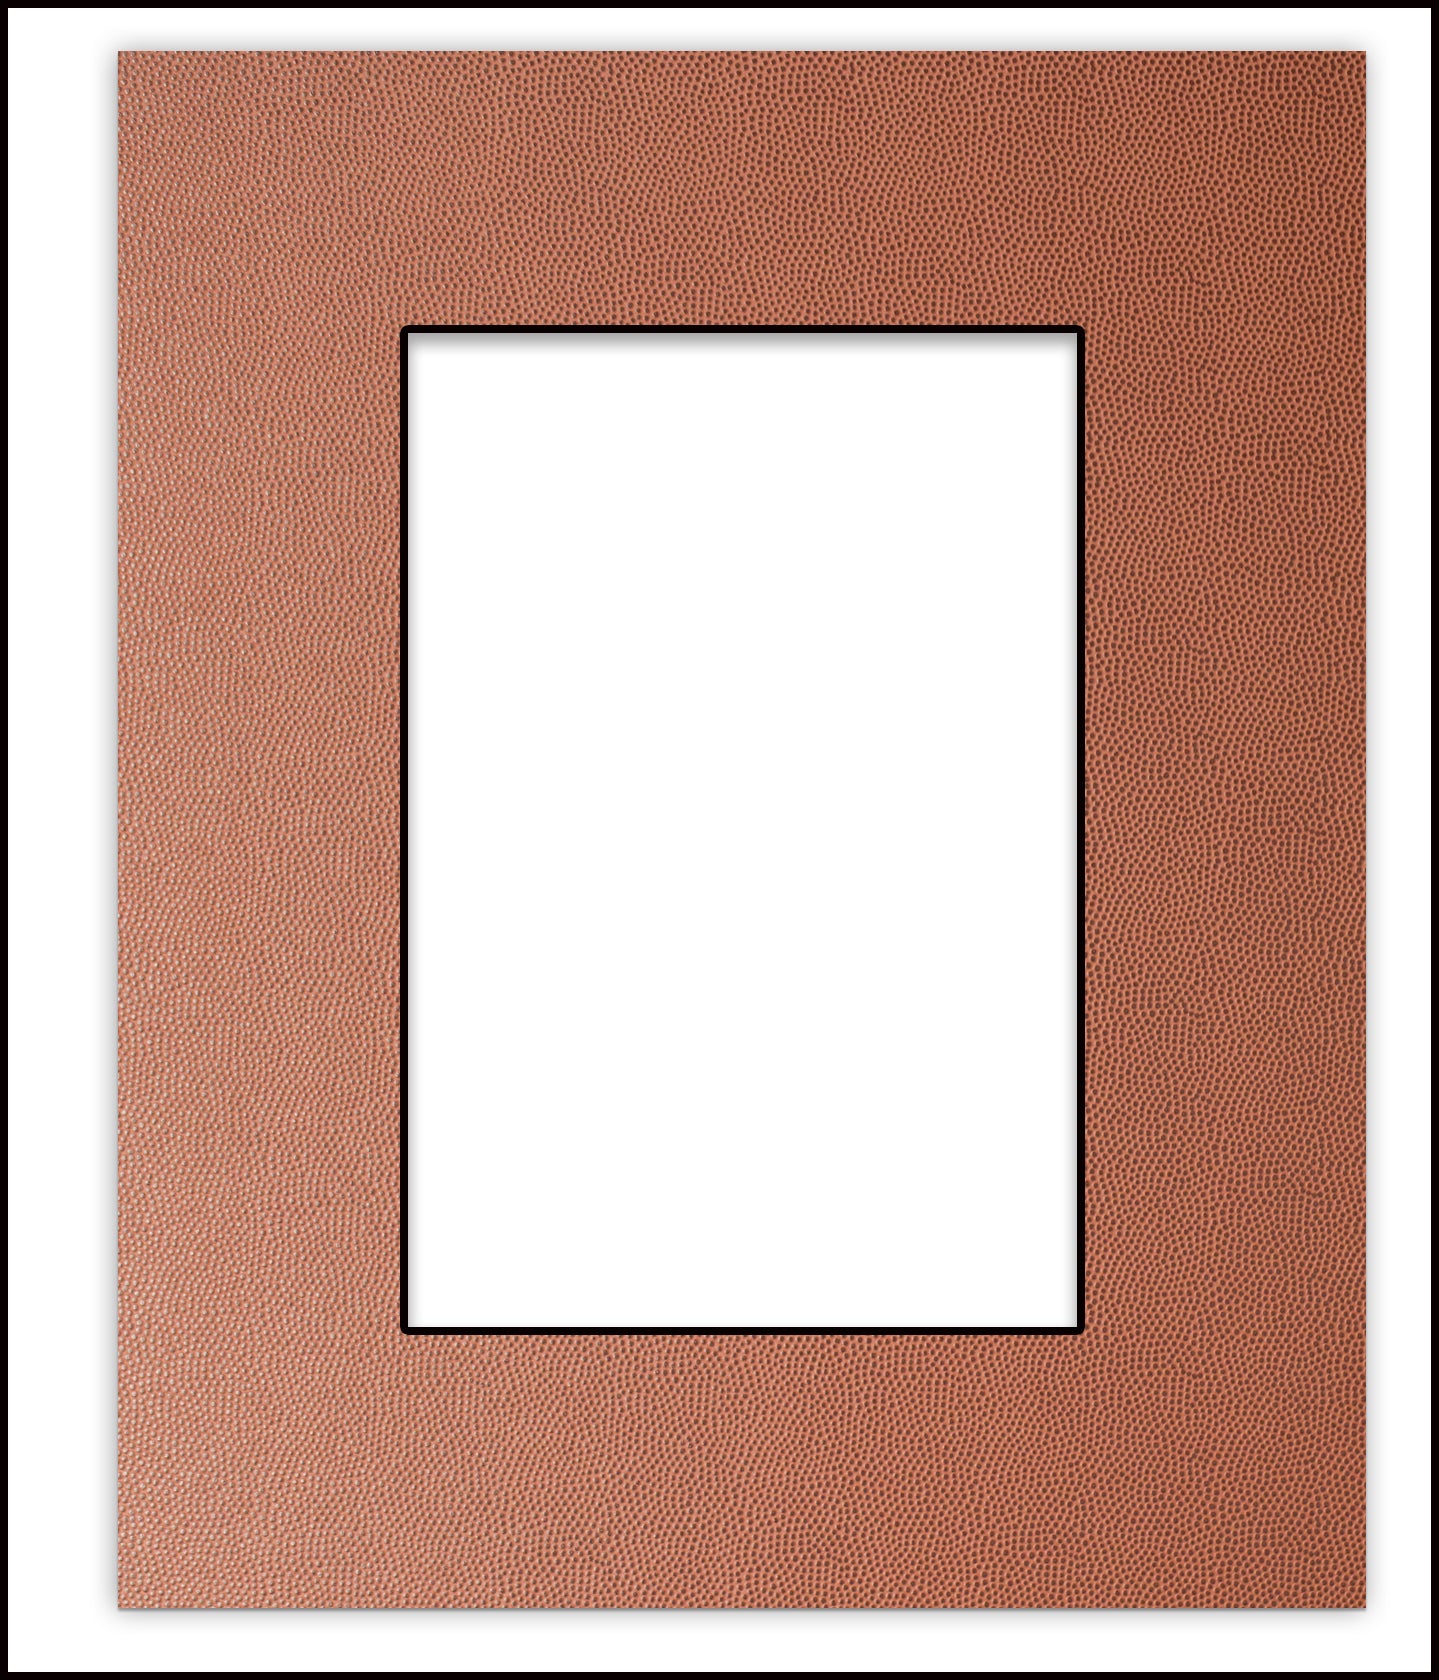 13x19 Mat for 18x24 Frame - Precut Mat Board Acid-Free Textured White 13x19 Photo Matte for A 18x24 Picture Frame, Premium Matboard for Family Photos